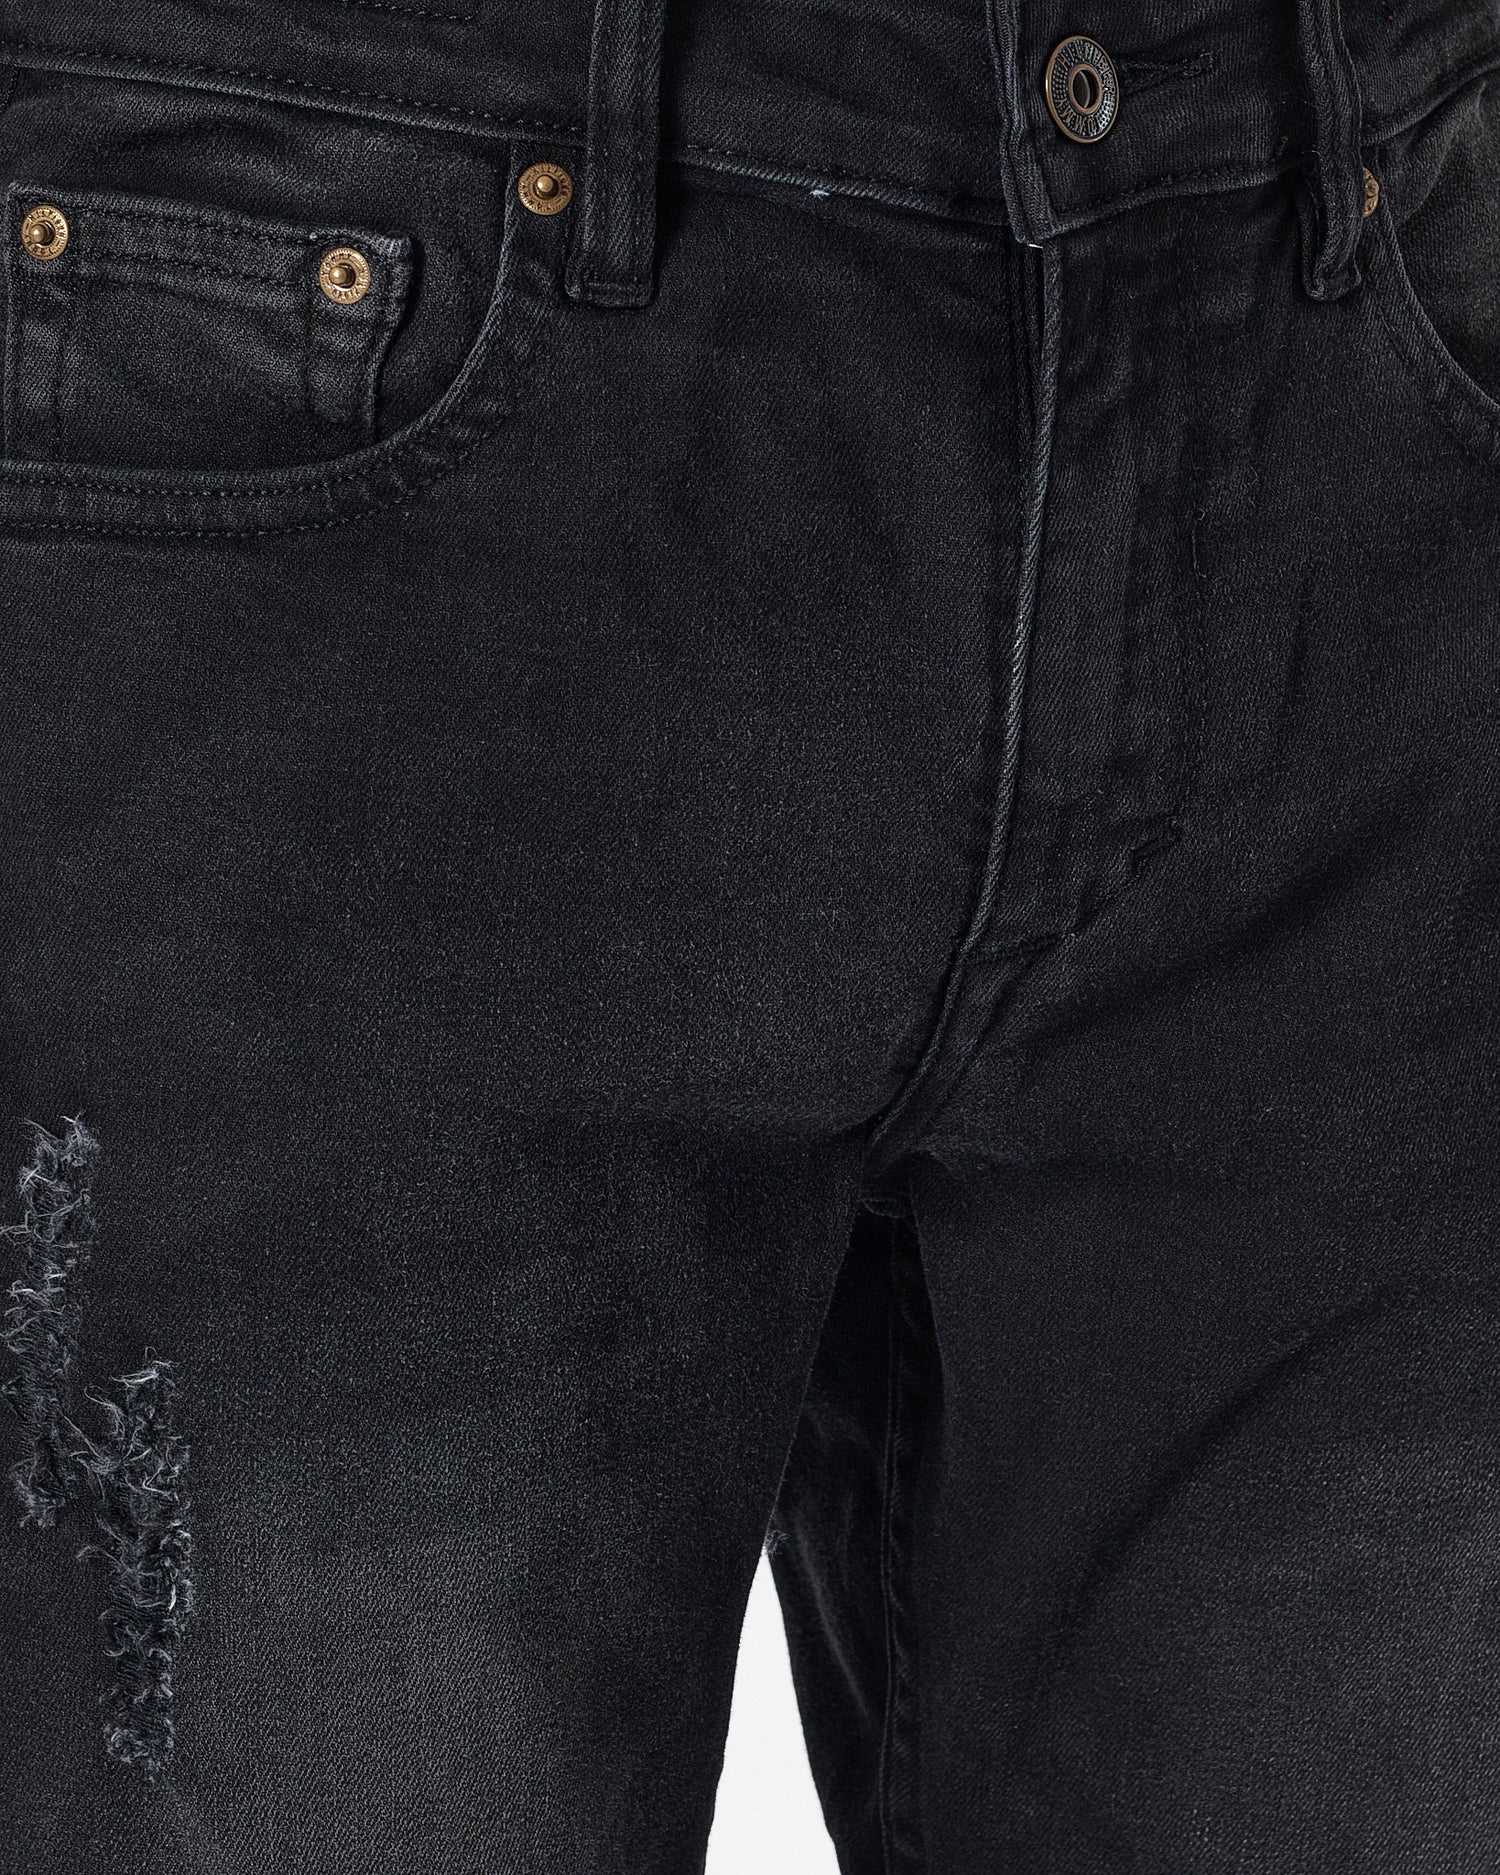 TH Distressed Men Charcoal Slim Fit Jeans 24.90